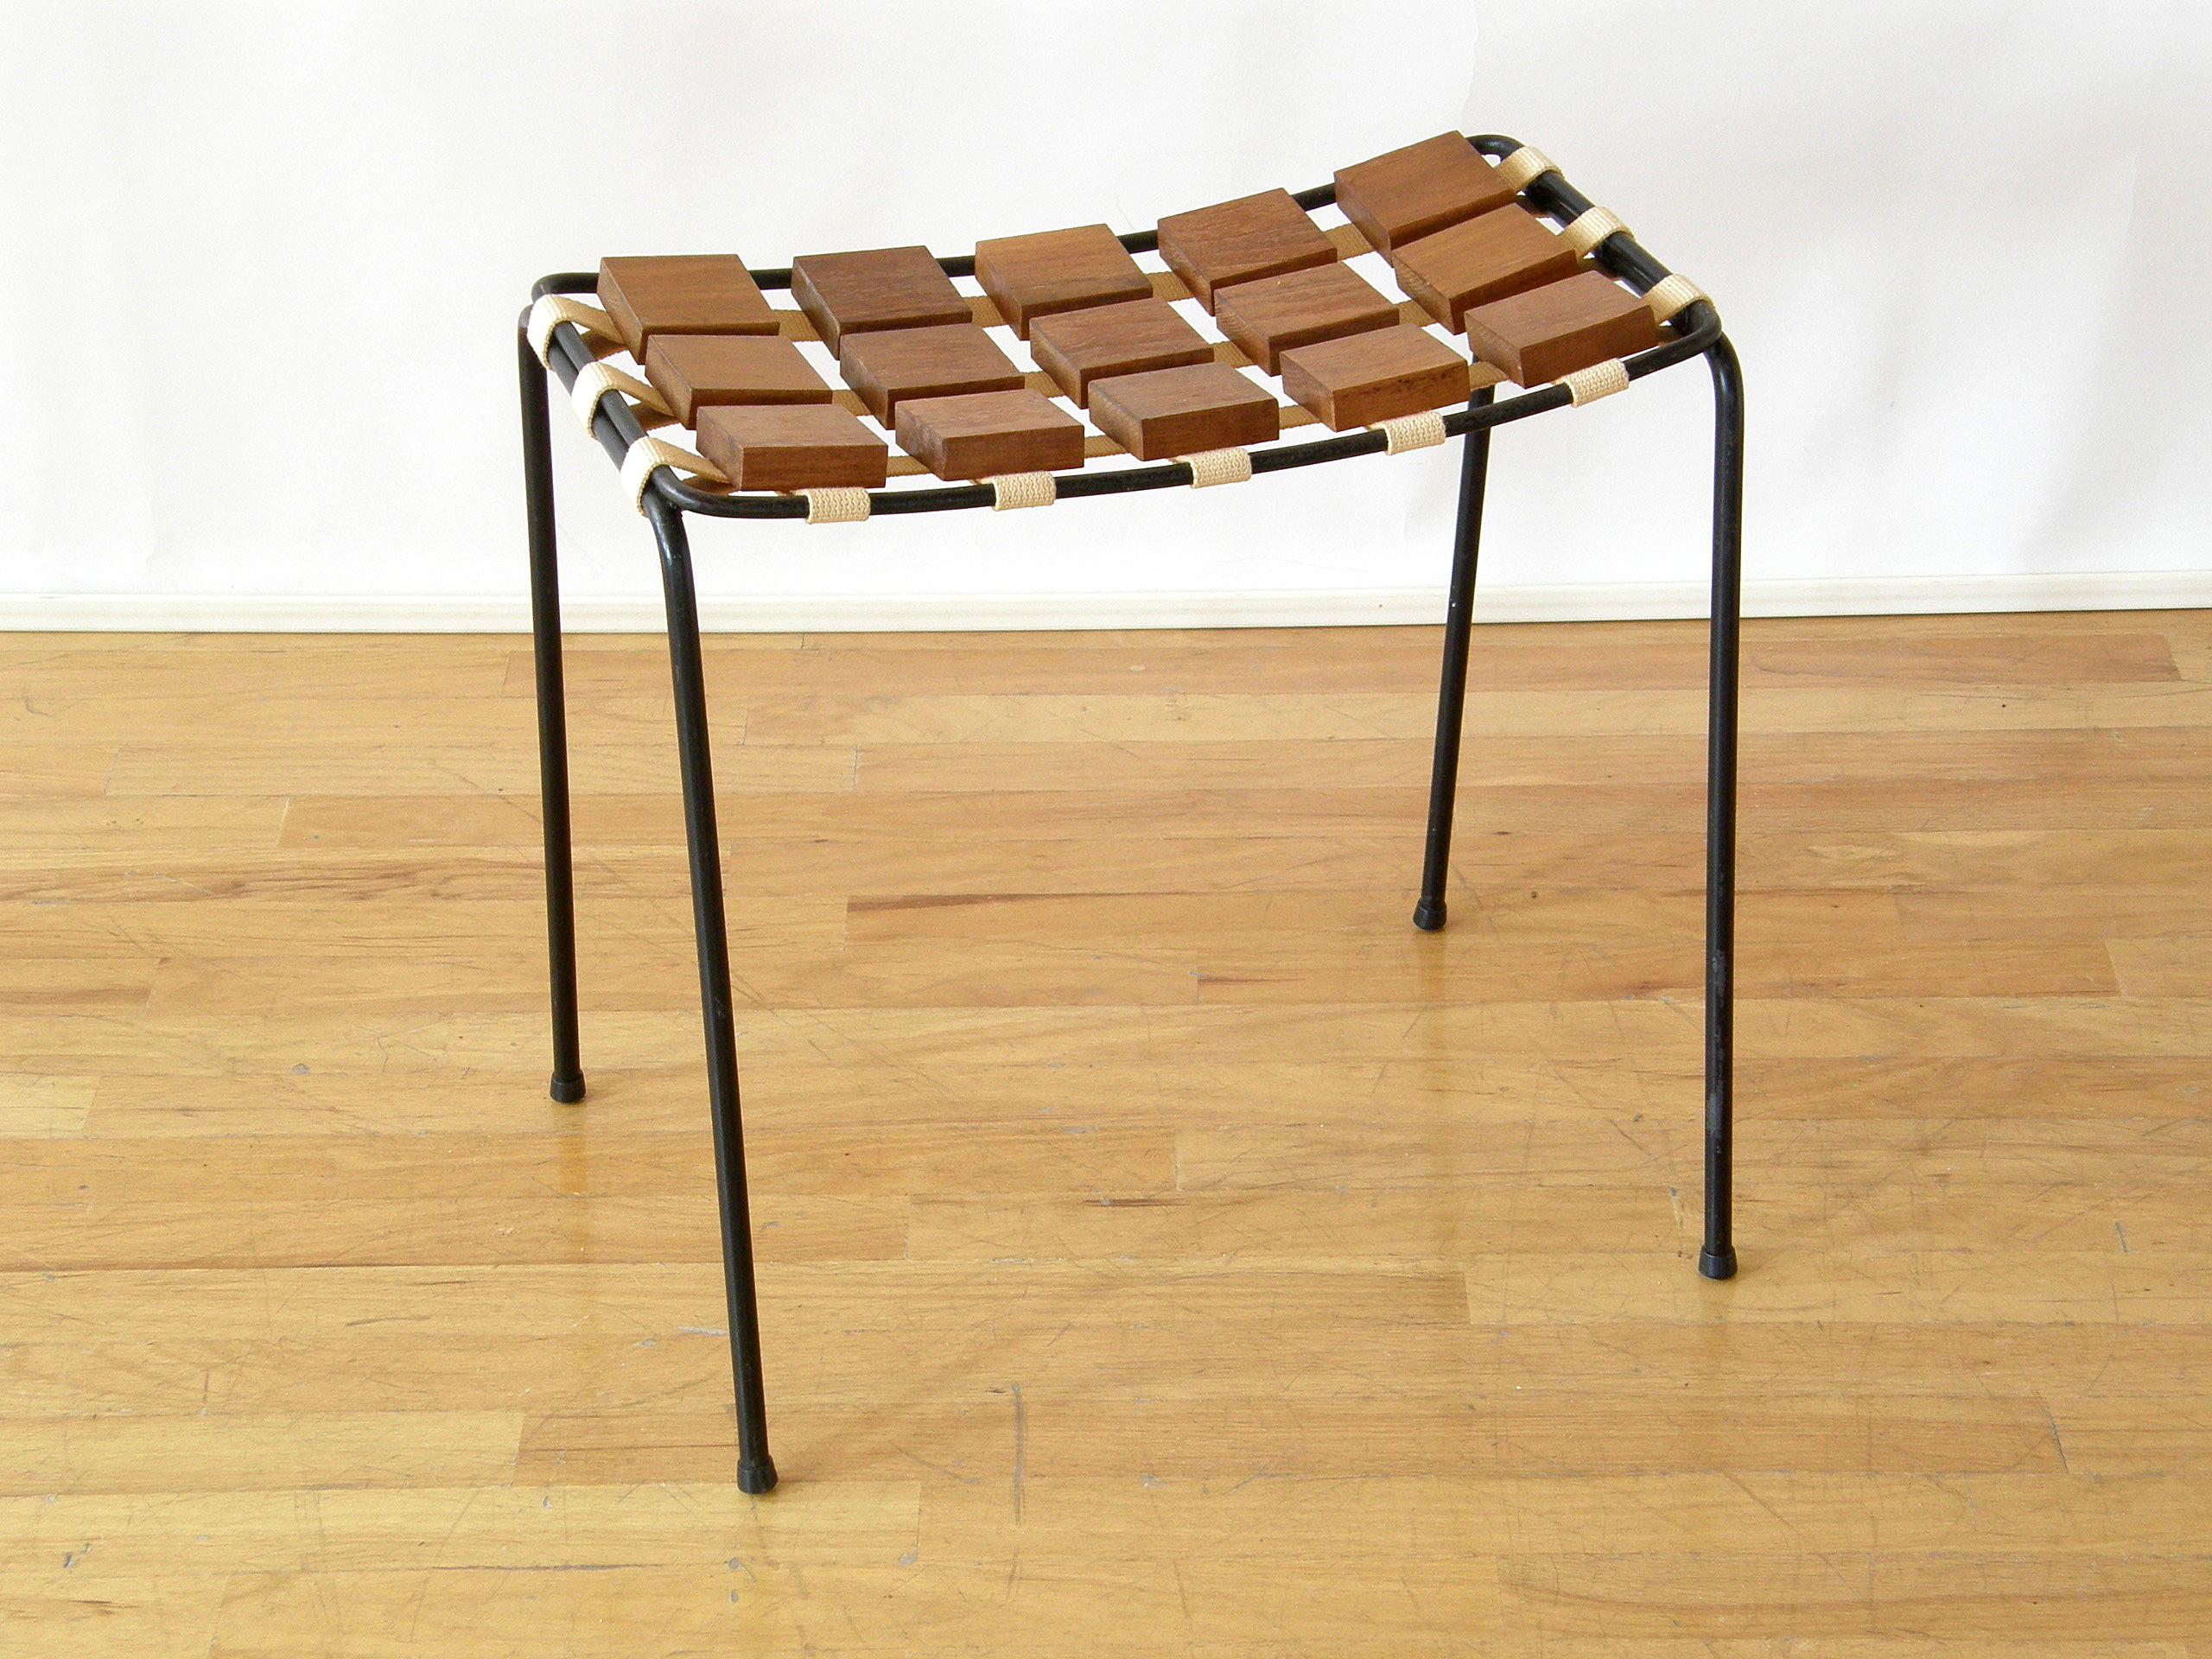 This Mid-Century Modern stool was designed by Maxwell Yellen as part of his 